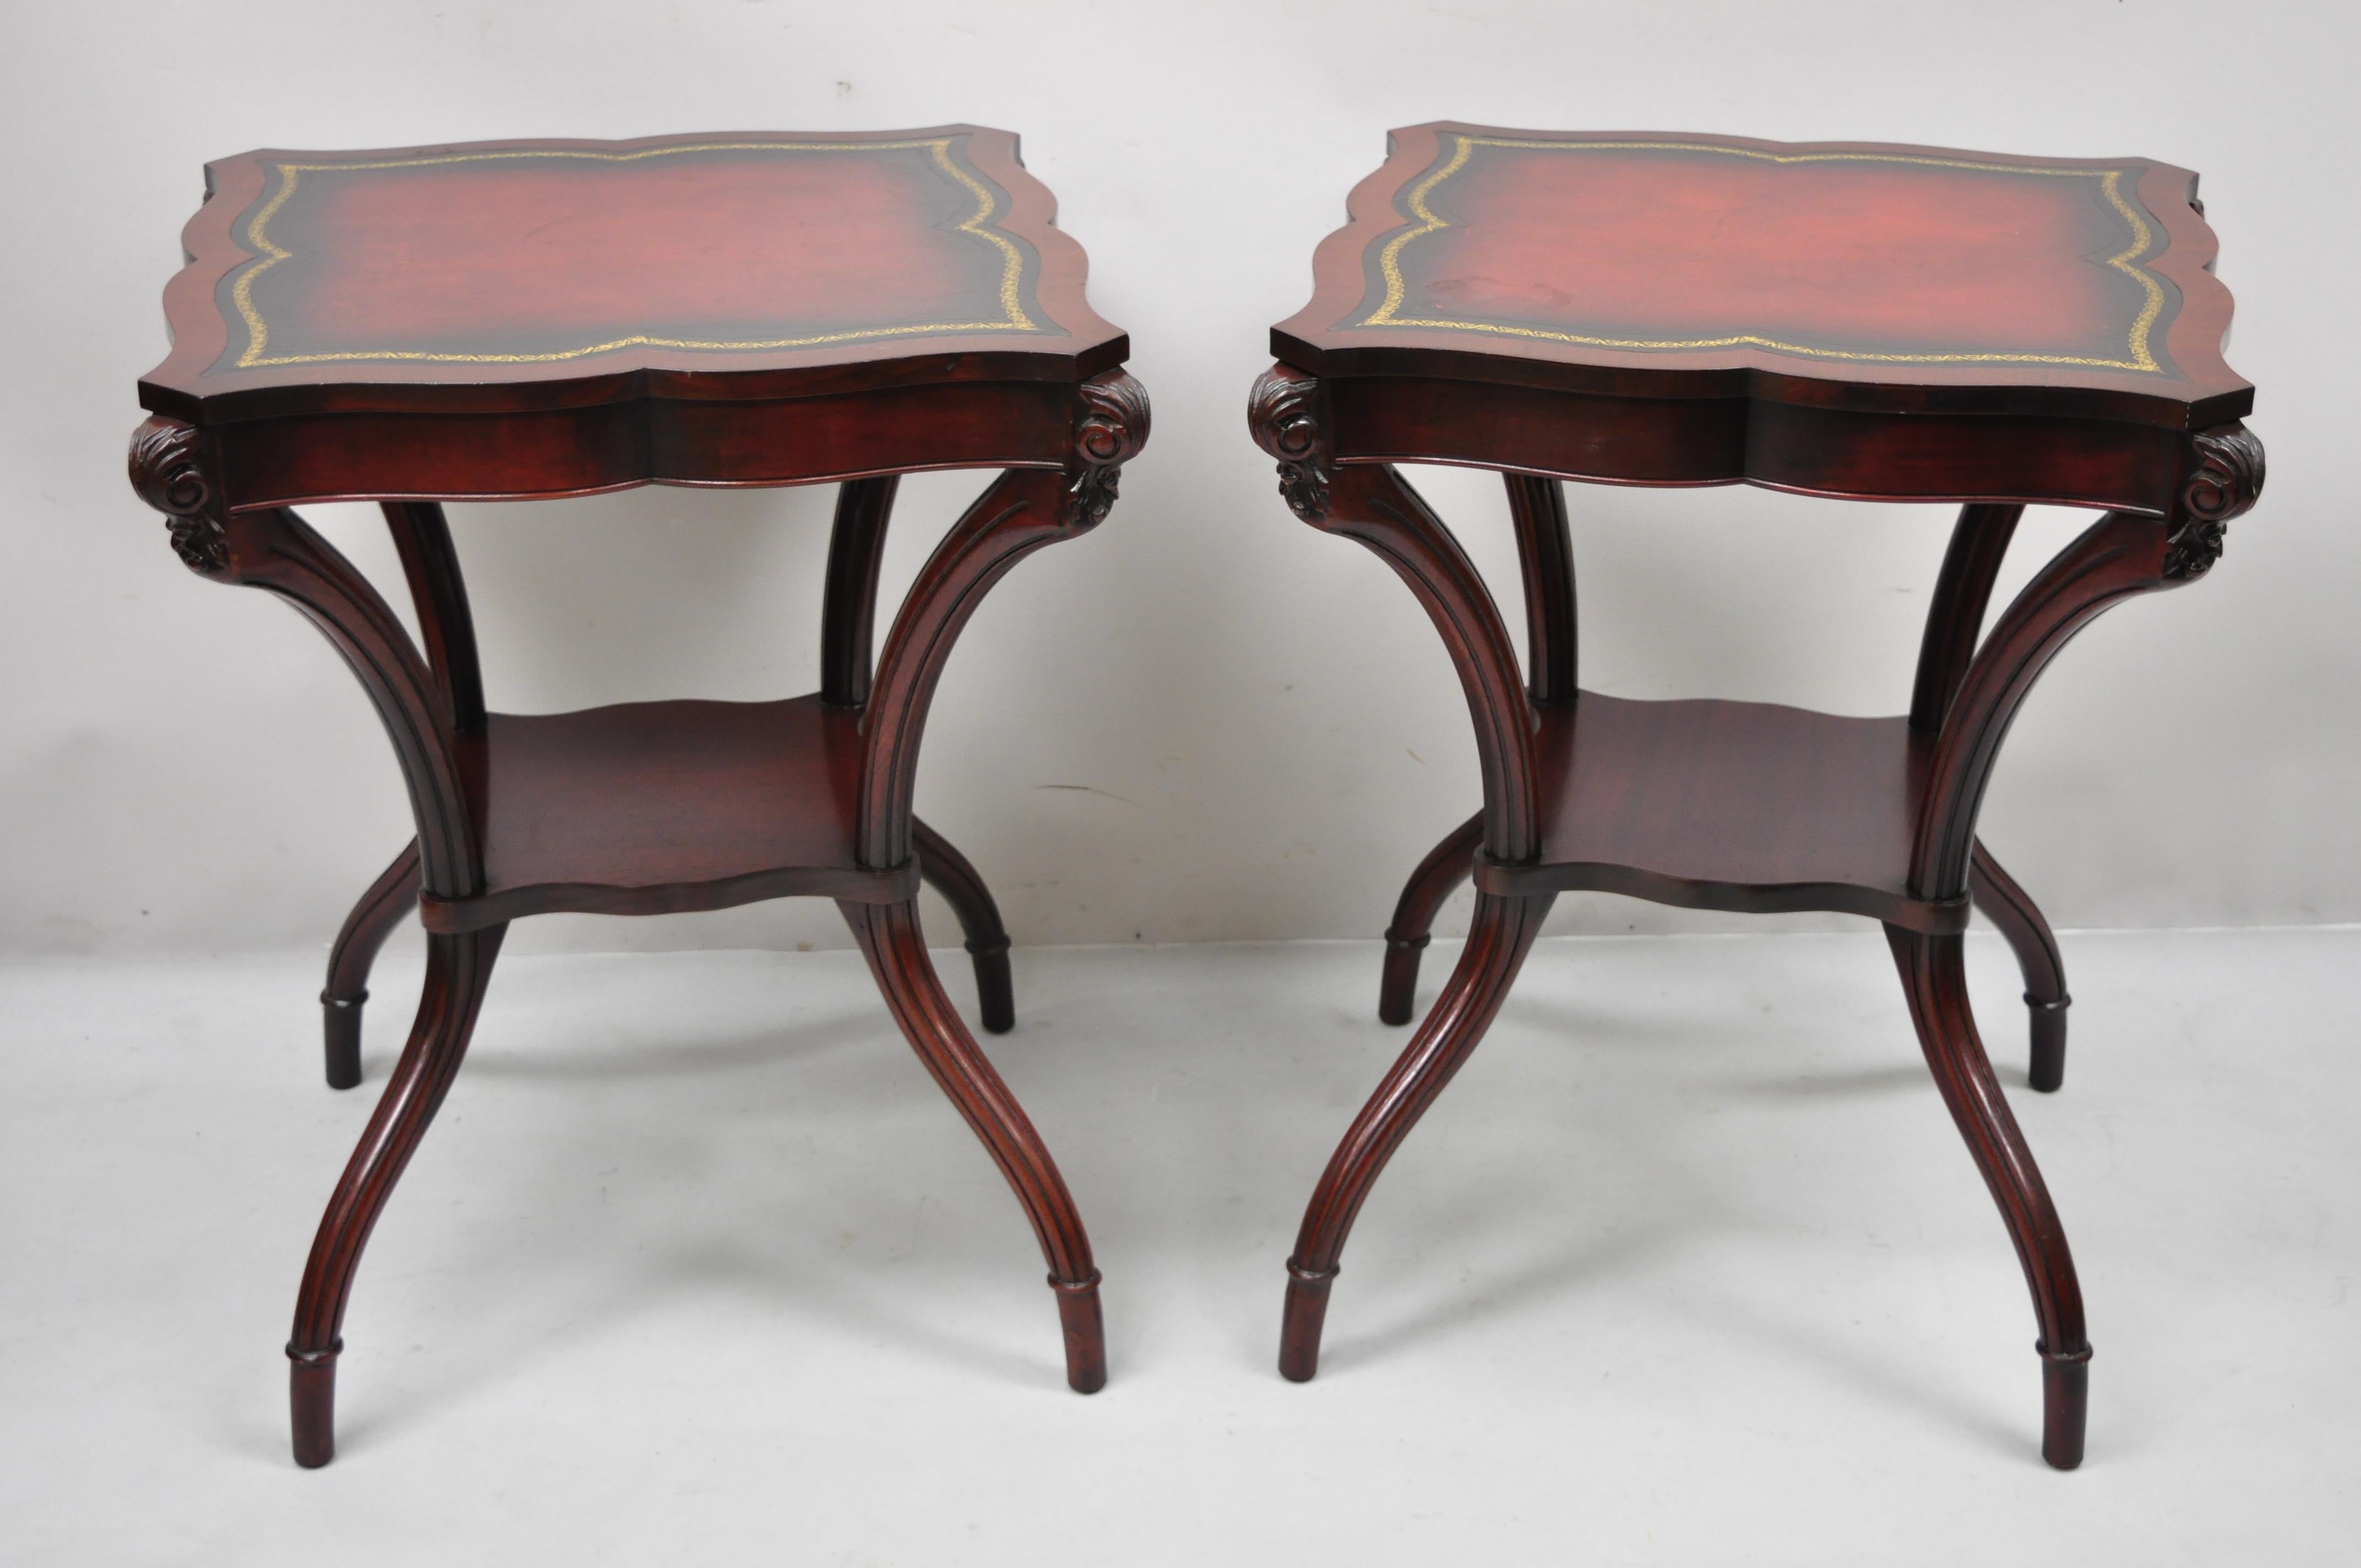 Vintage French Regency style red leather top mahogany lamp end tables - a pair. Item features red tooled leather tops, lower shelf, solid wood frame, beautiful wood grain, very nice vintage pair, great style and form. Circa Mid 20th Century.